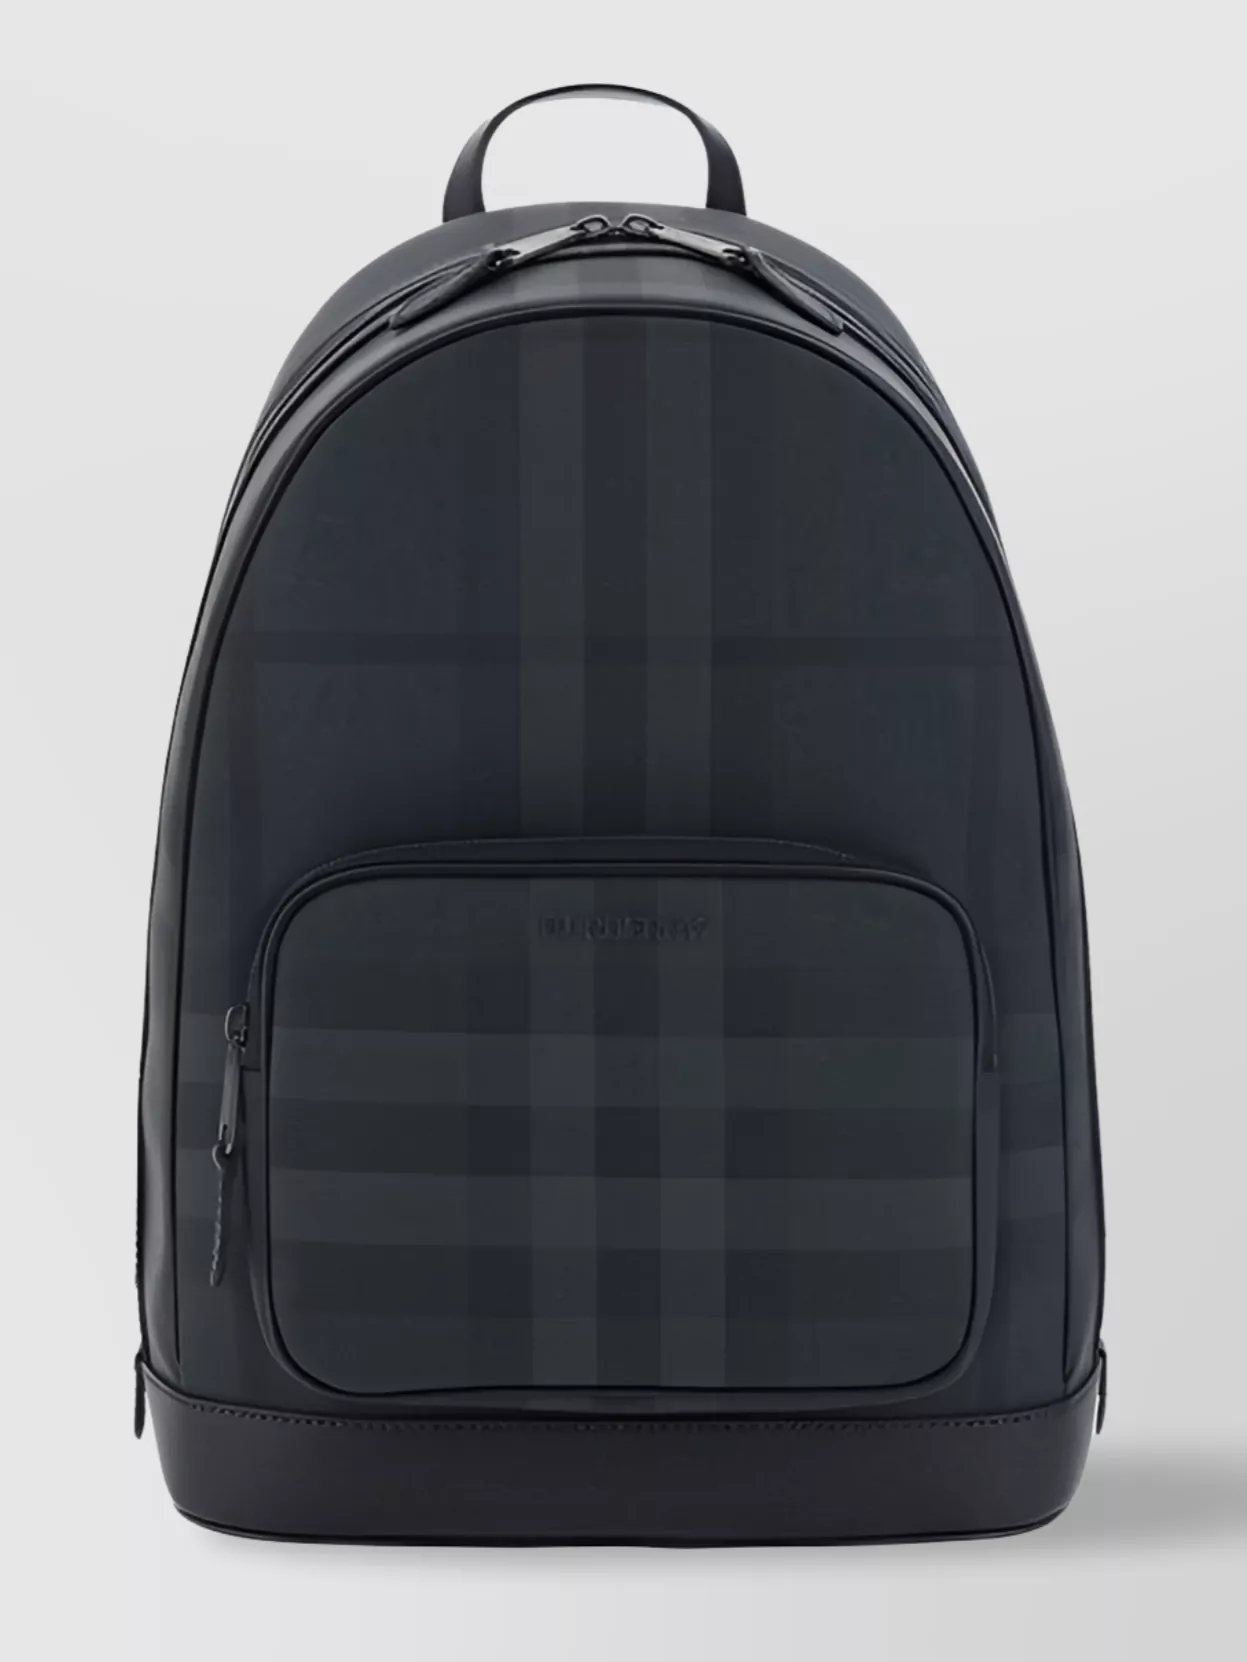 Burberry Check Archivio Pattern Backpack With Front Pocket In Black